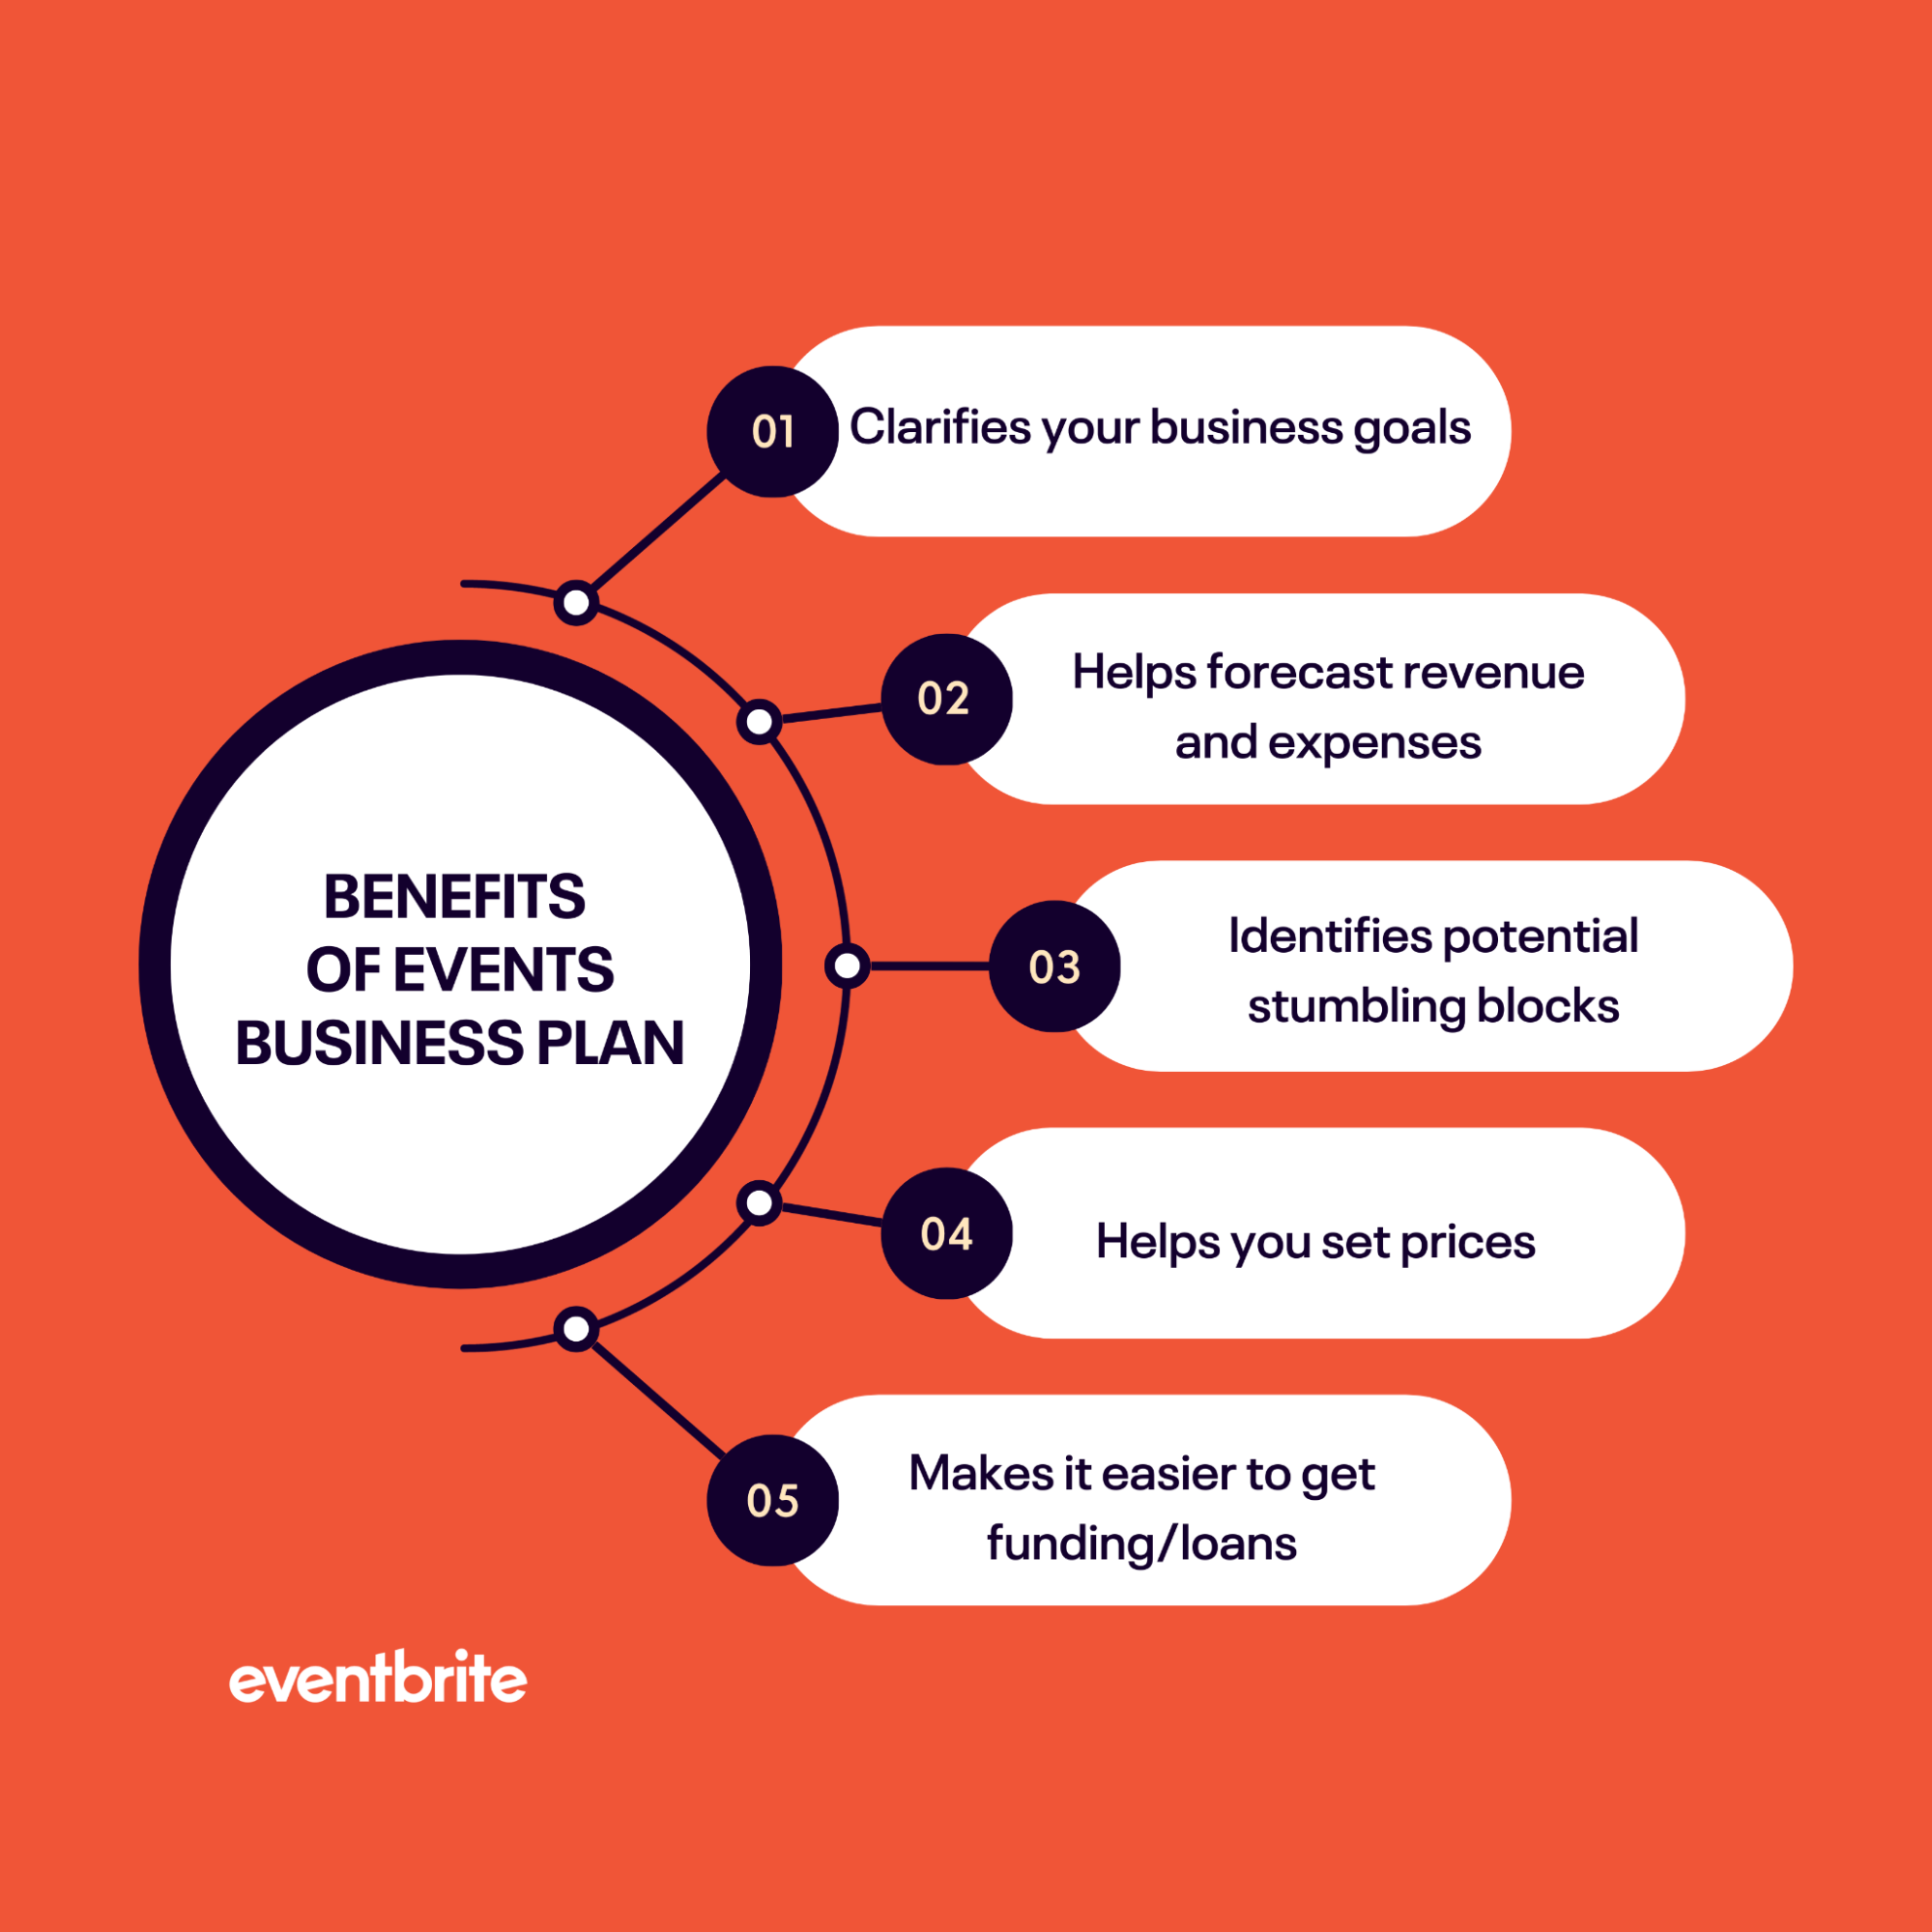 Benefits of events business plan